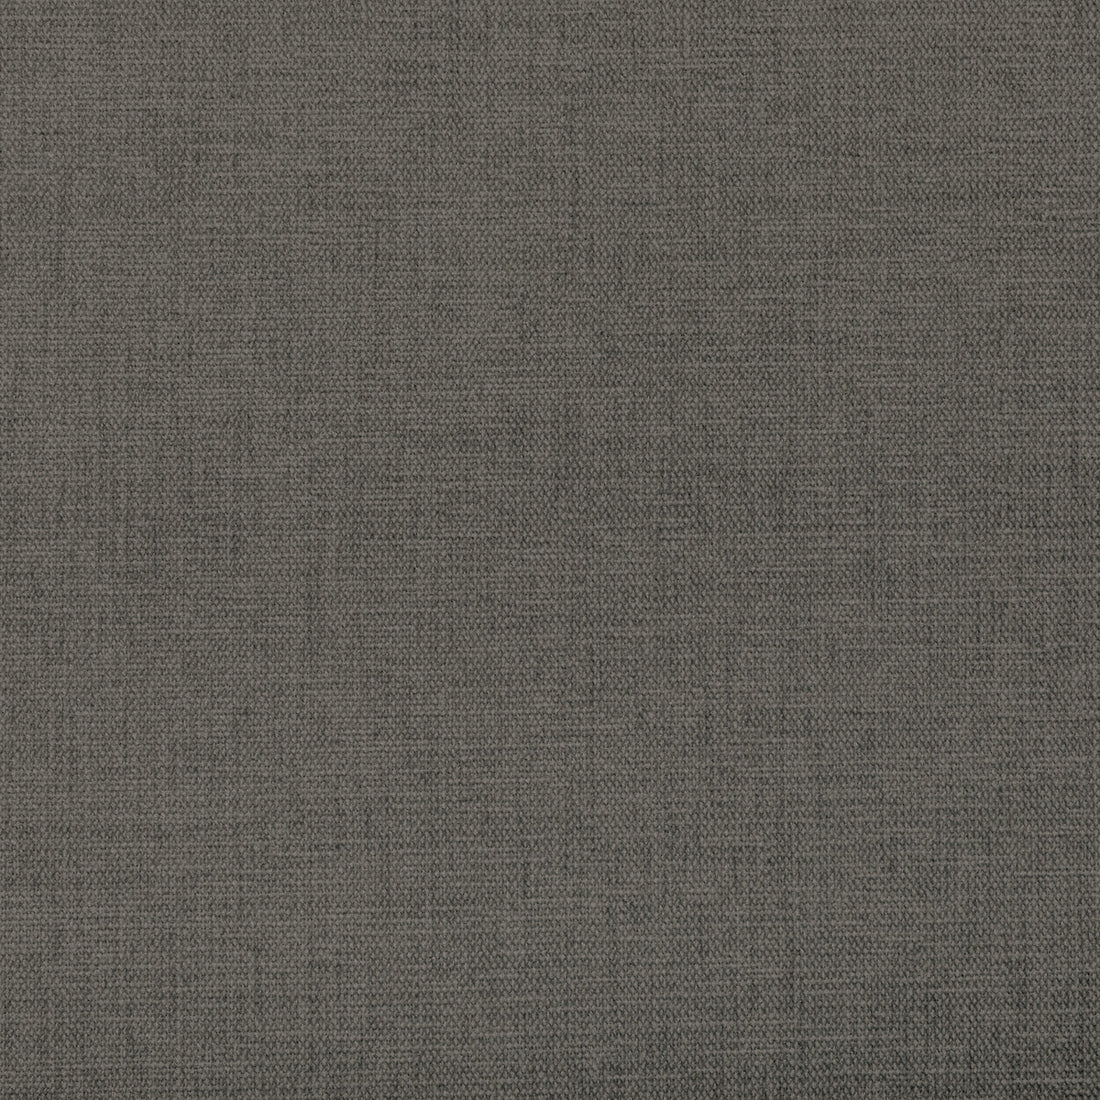 Kravet Contract fabric in 34961-1152 color - pattern 34961.1152.0 - by Kravet Contract in the Performance Kravetarmor collection